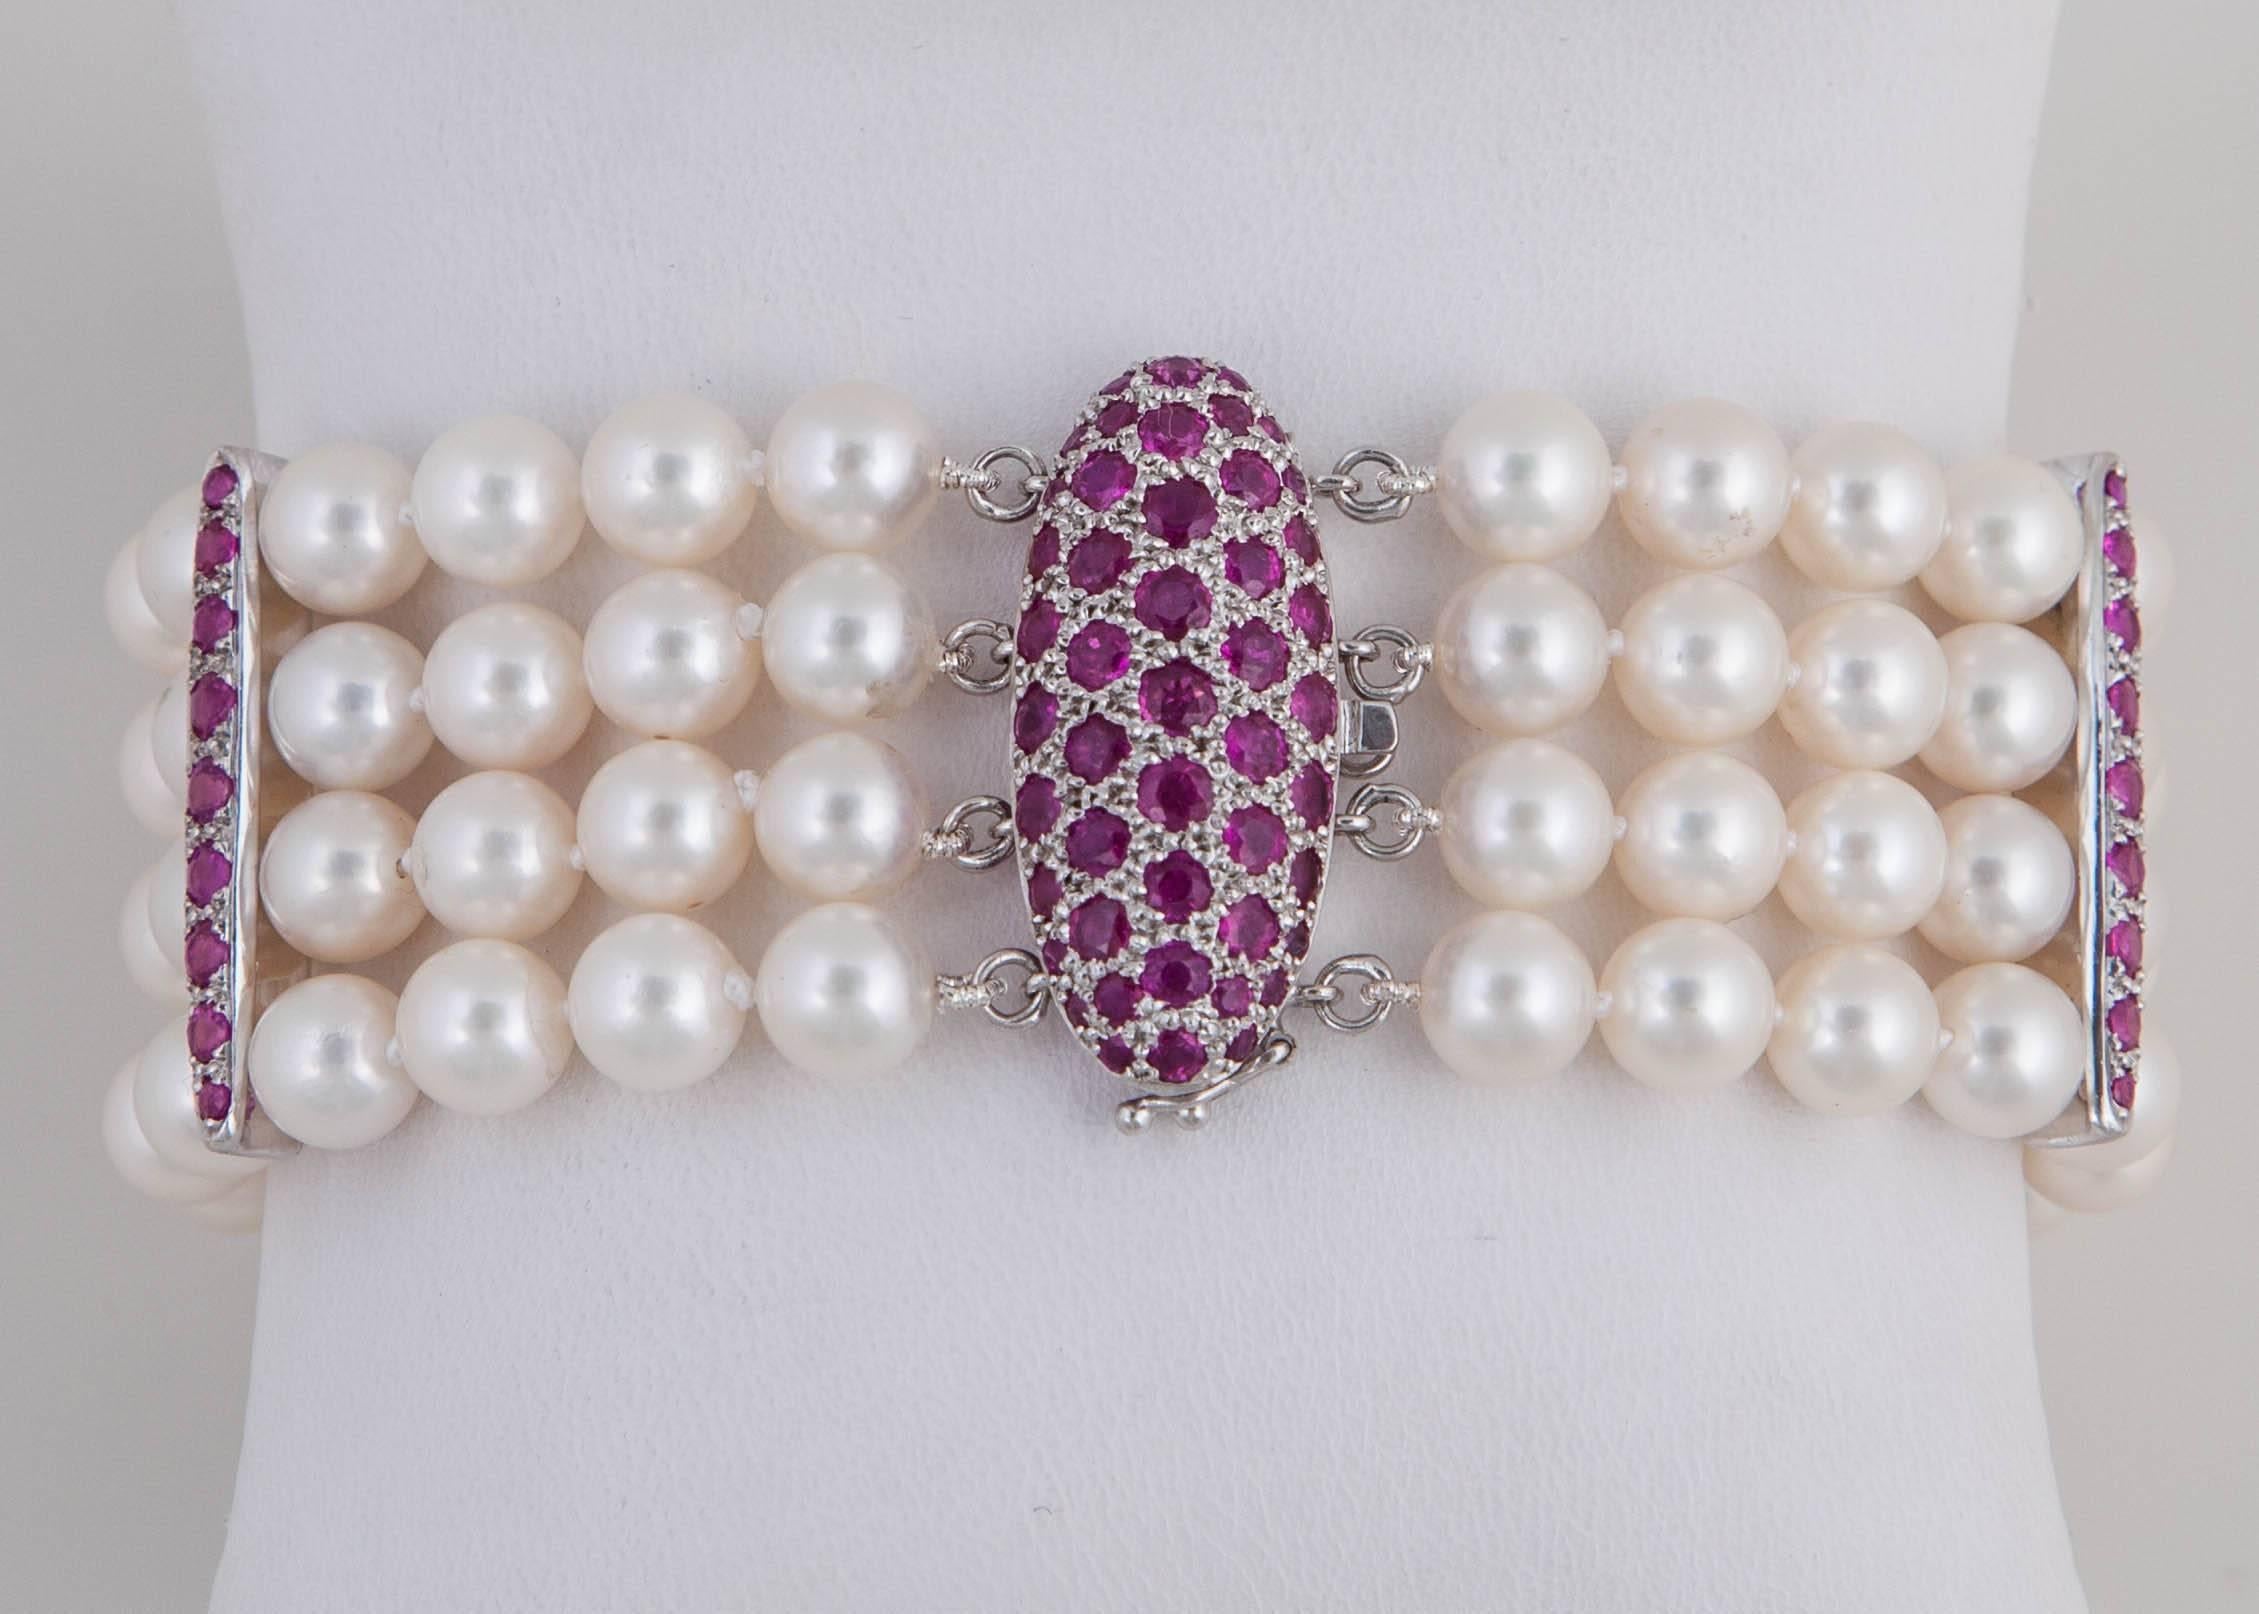 This 4 row Akoya Cultured Pearl strand bracelet is enhanced by three 18k white gold ruby spacers, as well as a ruby clasp. Elegant and classy this bracelet is perfect for most occasions.

The Museum Collection is comprised of stunning one of a